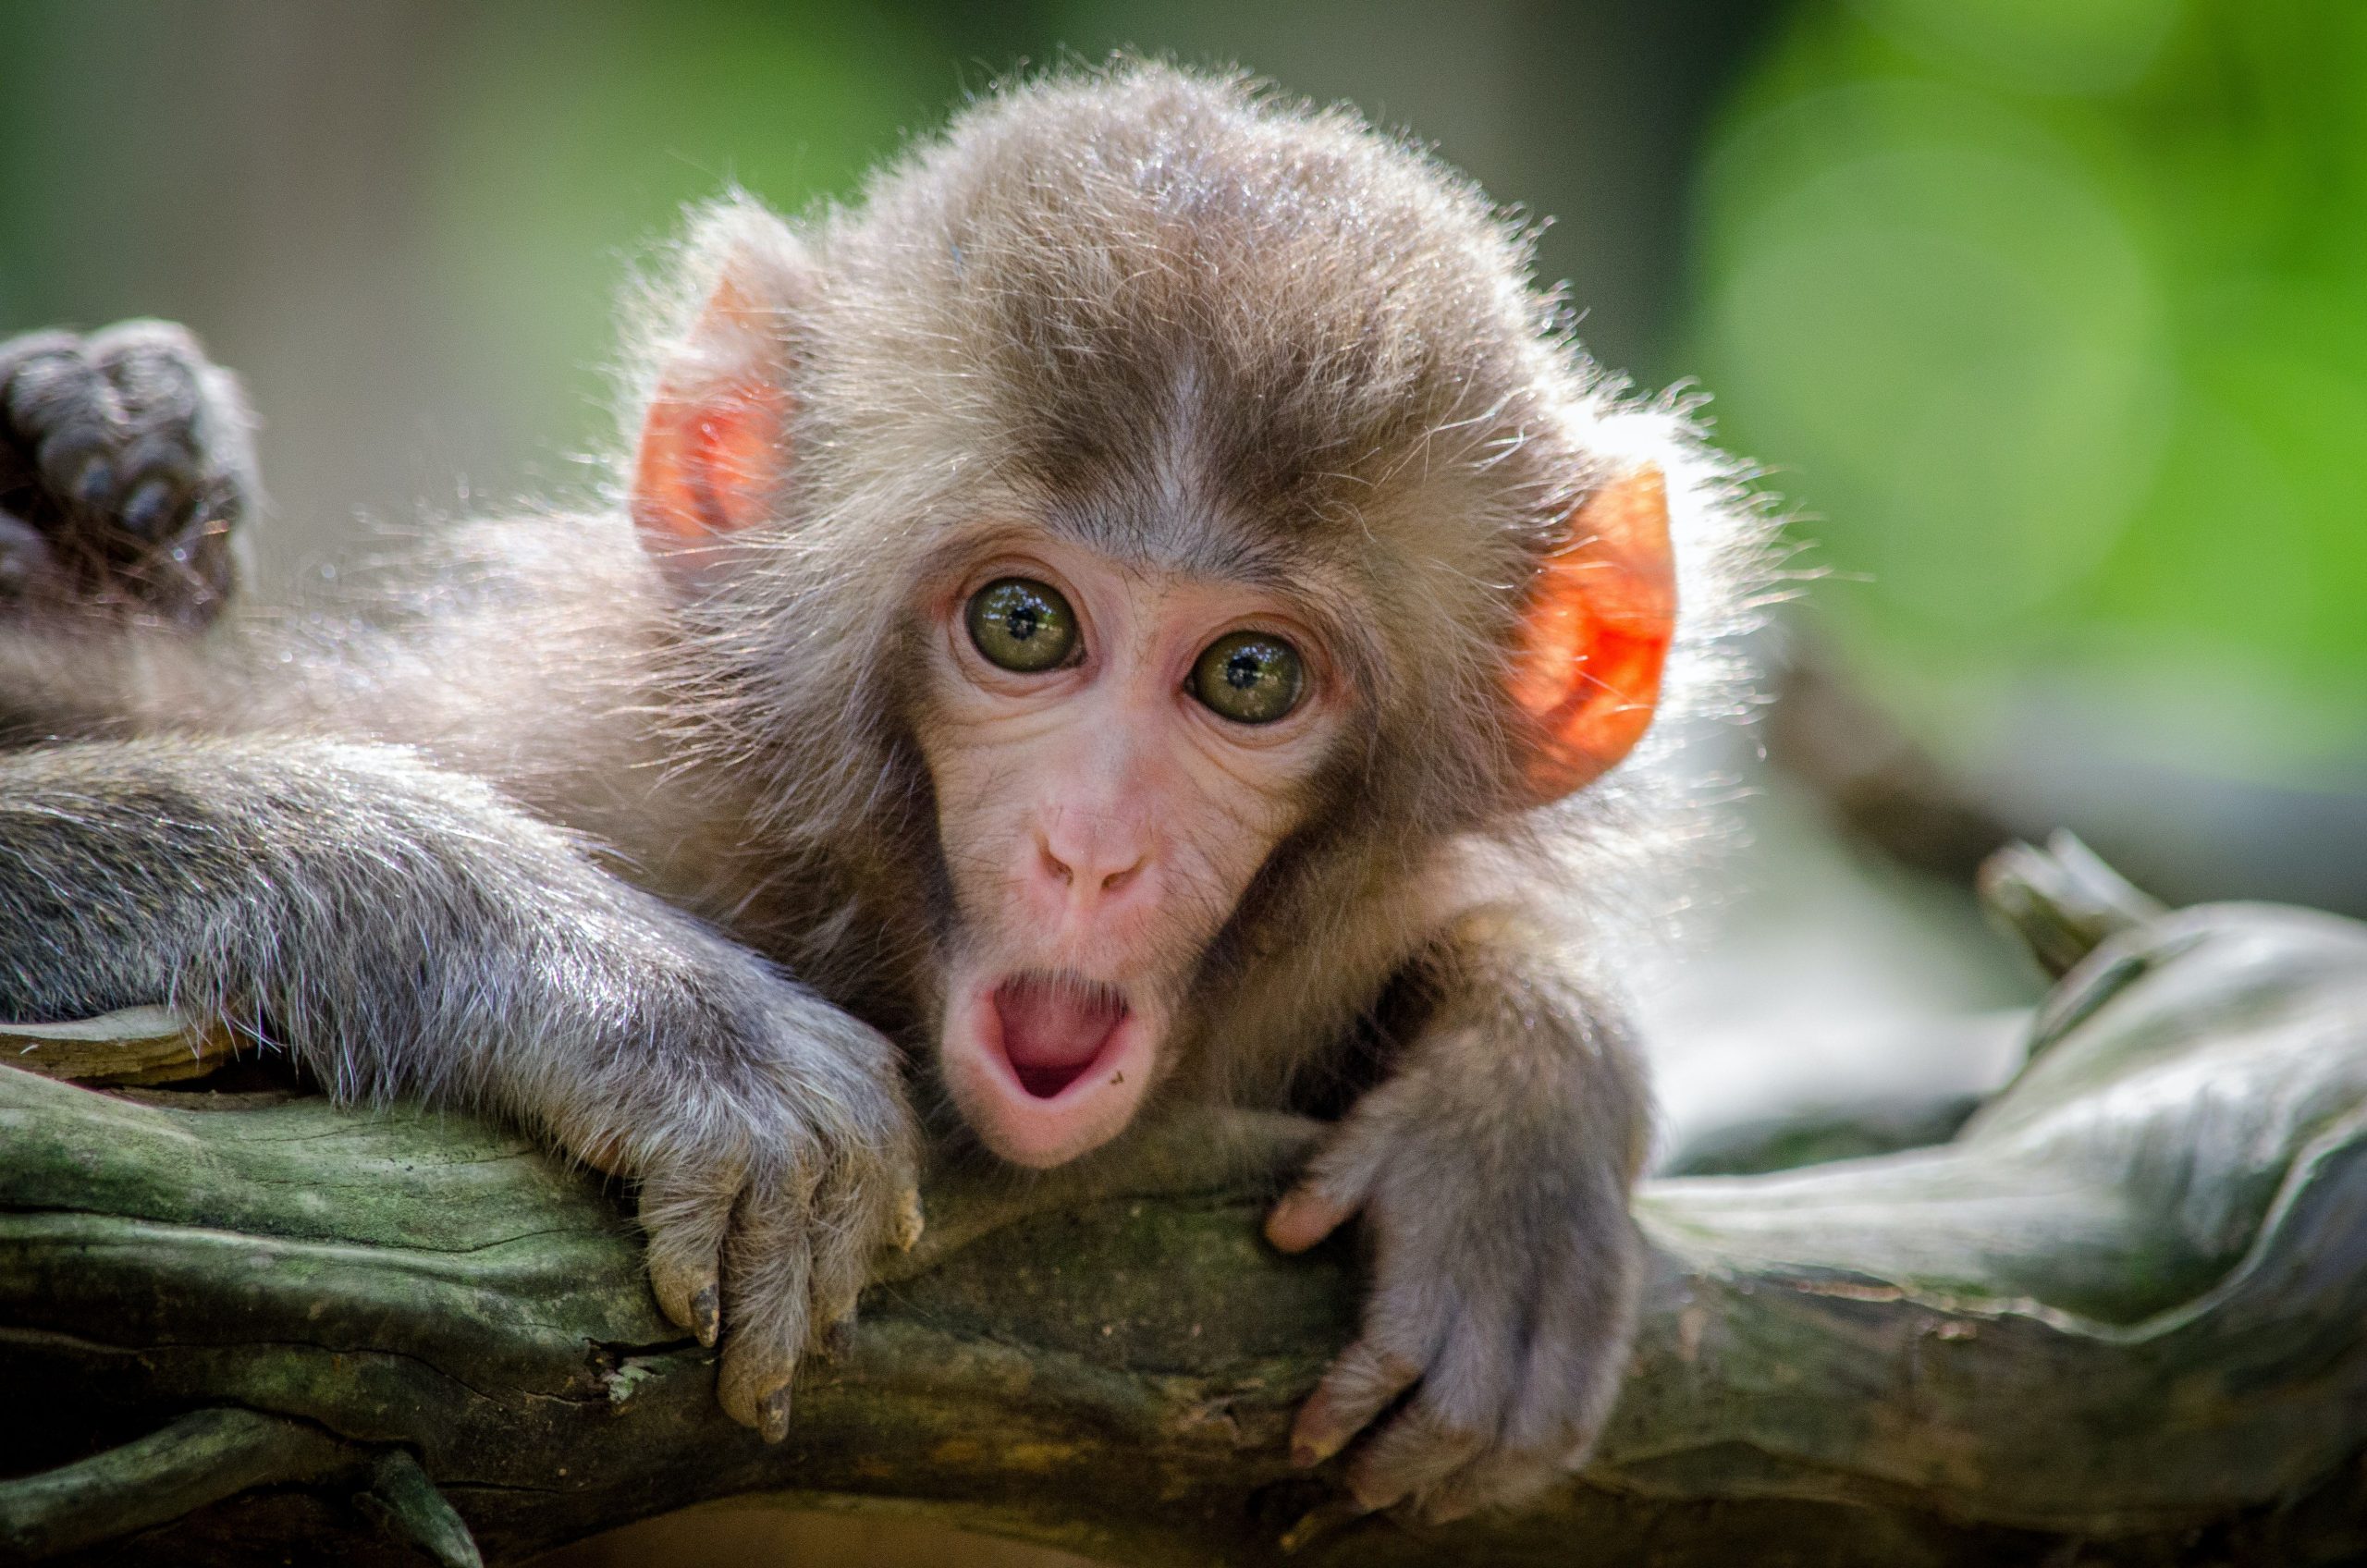 Viral video: Zoo monkey’s reaction to magic trick is winning the internet